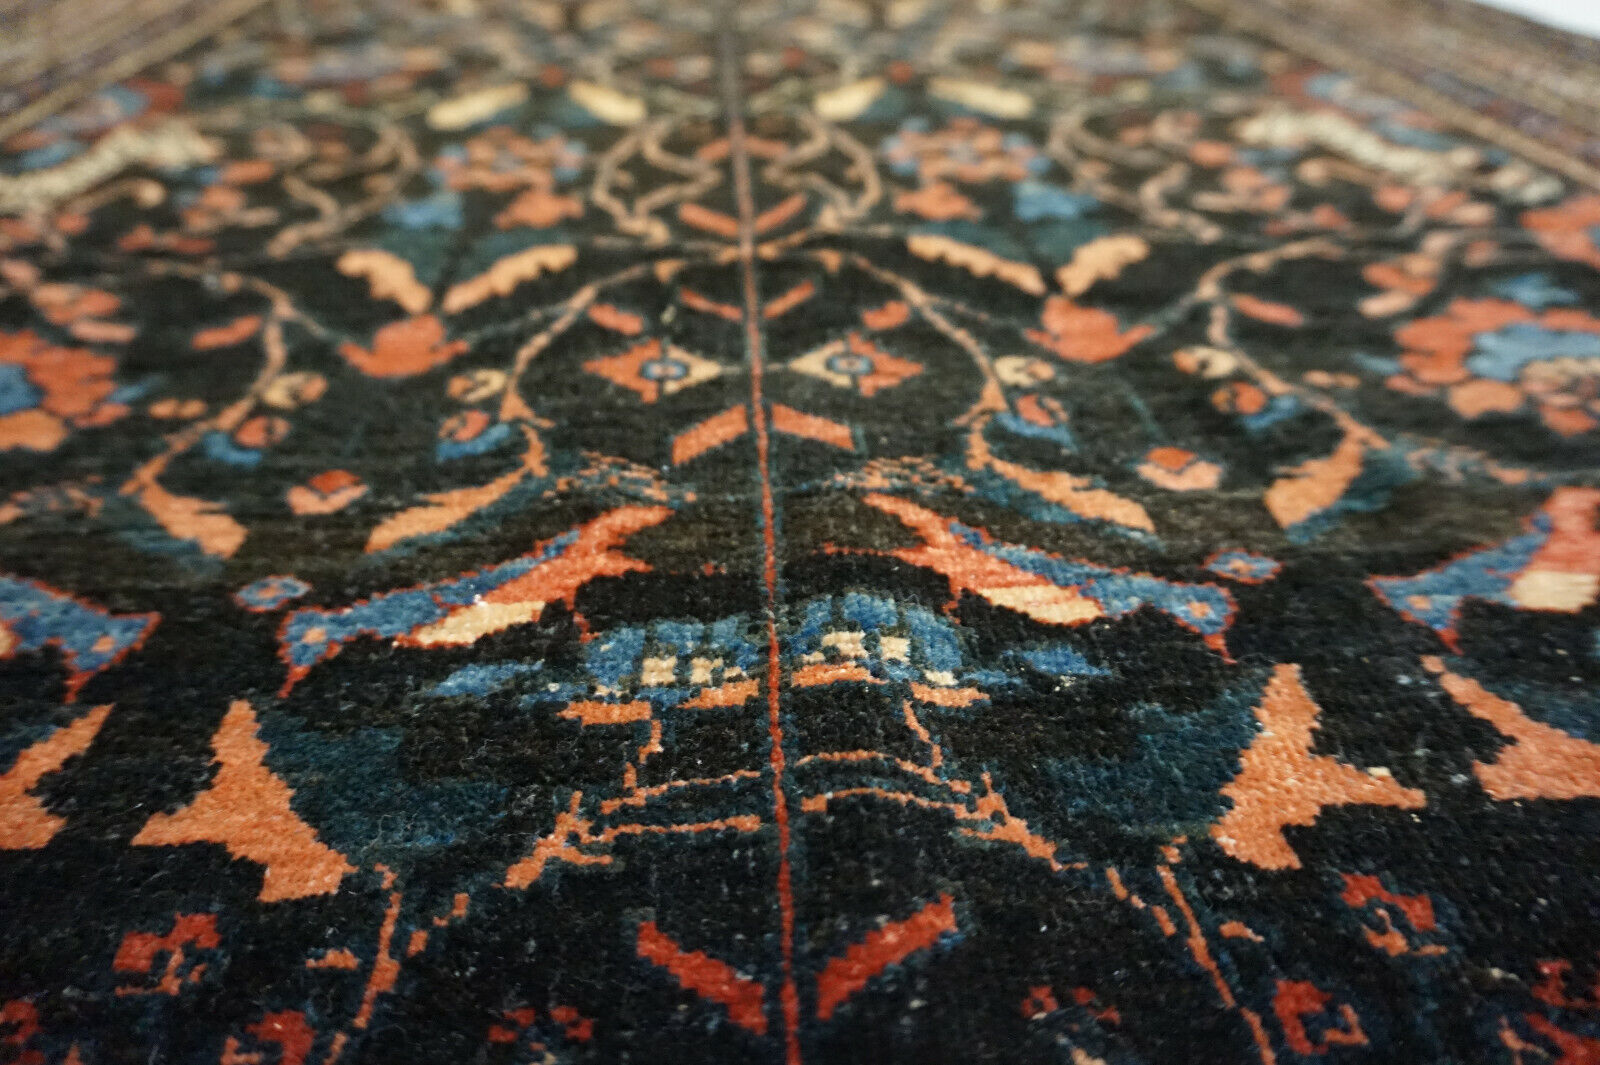 Detailed shot of the rich color palette on the Handmade Antique Persian Tehran Rug